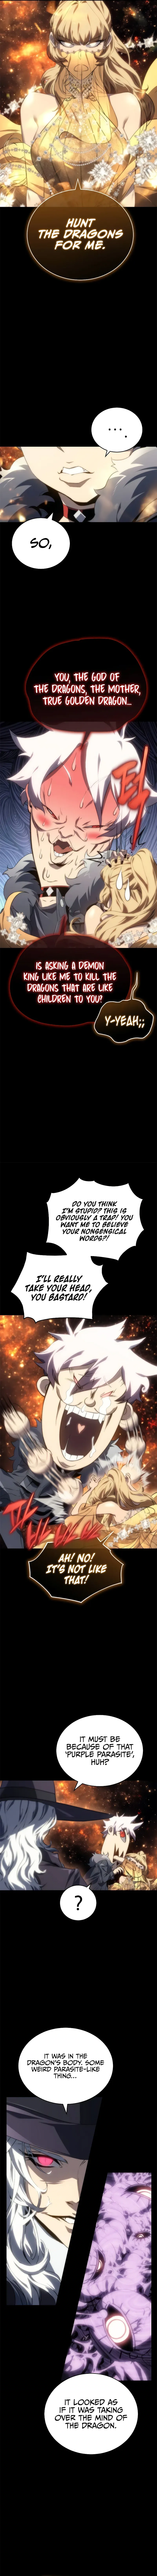 Why I Quit Being the Demon King Chapter 8 page 7